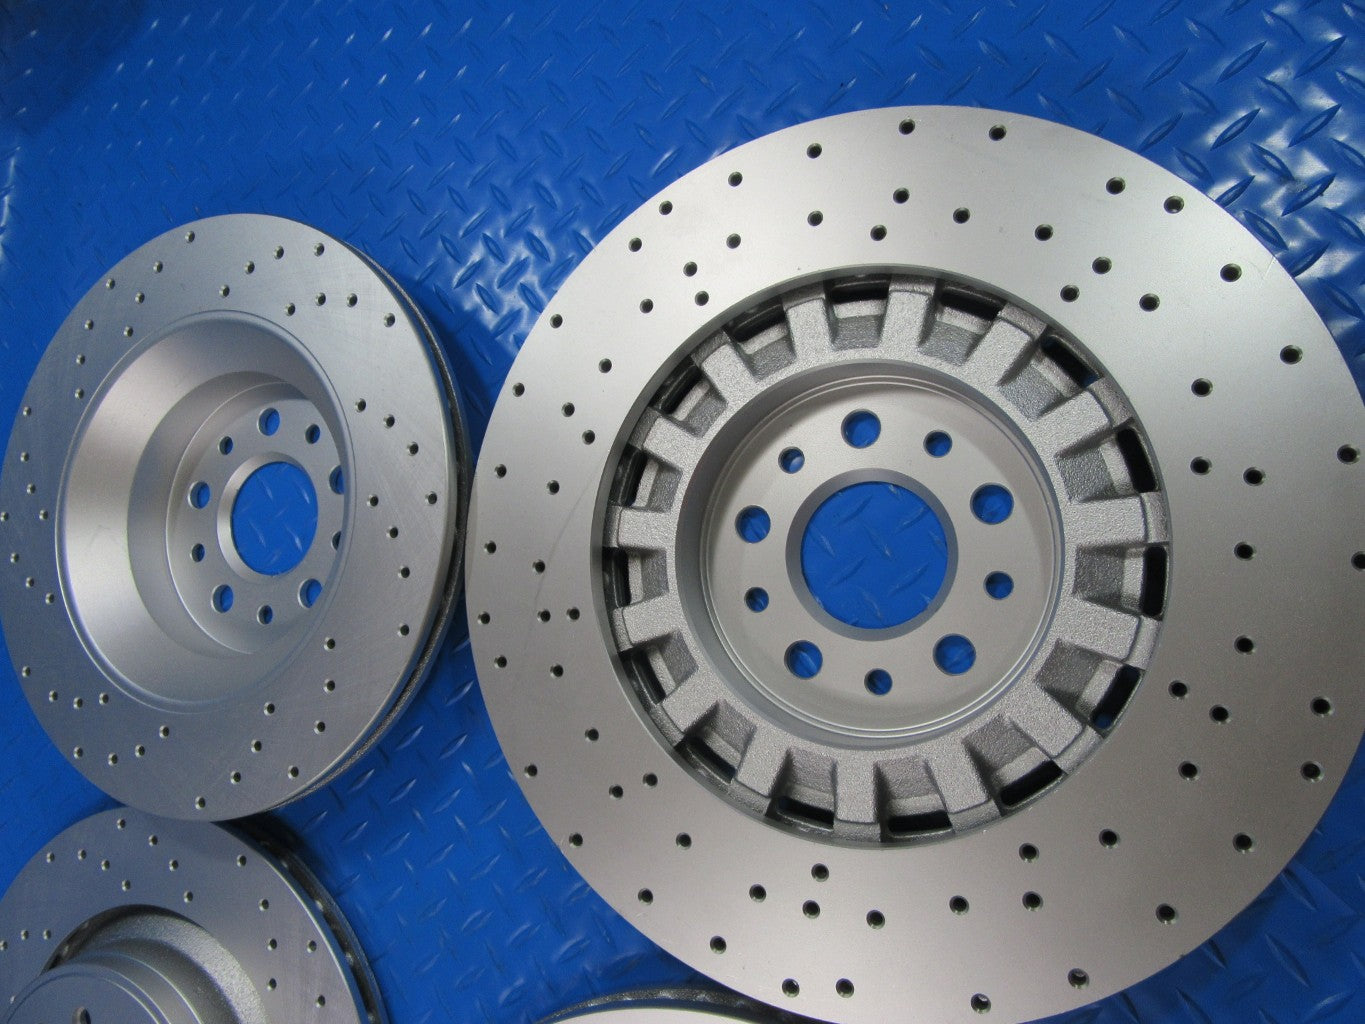 Maserati Levante S front rear brake pads and rotors drilled TopEuro #7355 Wholesale